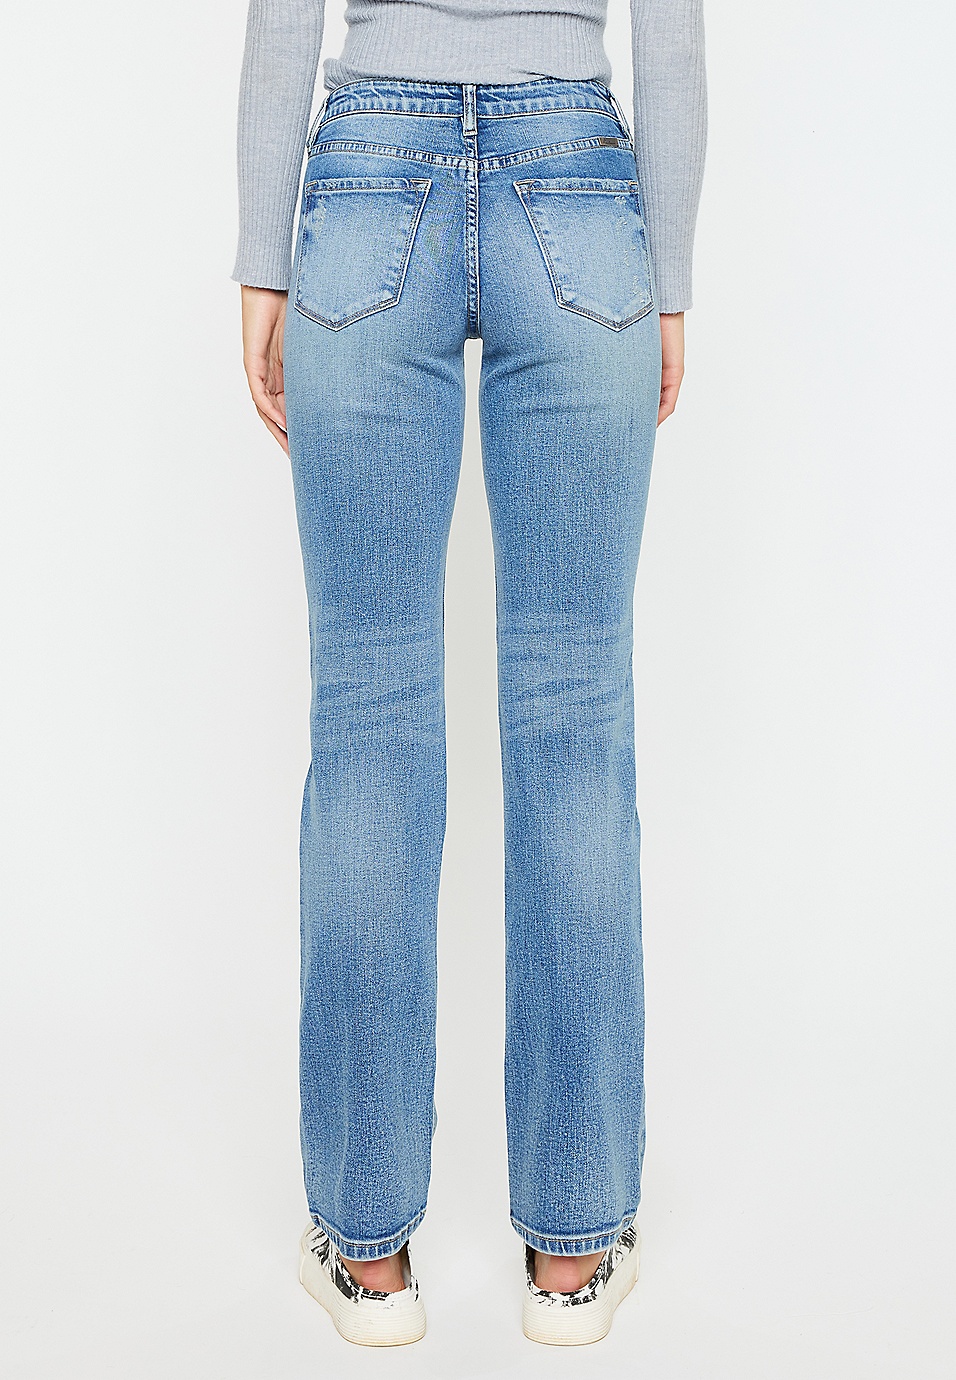 Christopher Kane Mid-Rise Straight Leg Jeans - Neutrals, 8.75 Rise Jeans,  Clothing - CHI28952